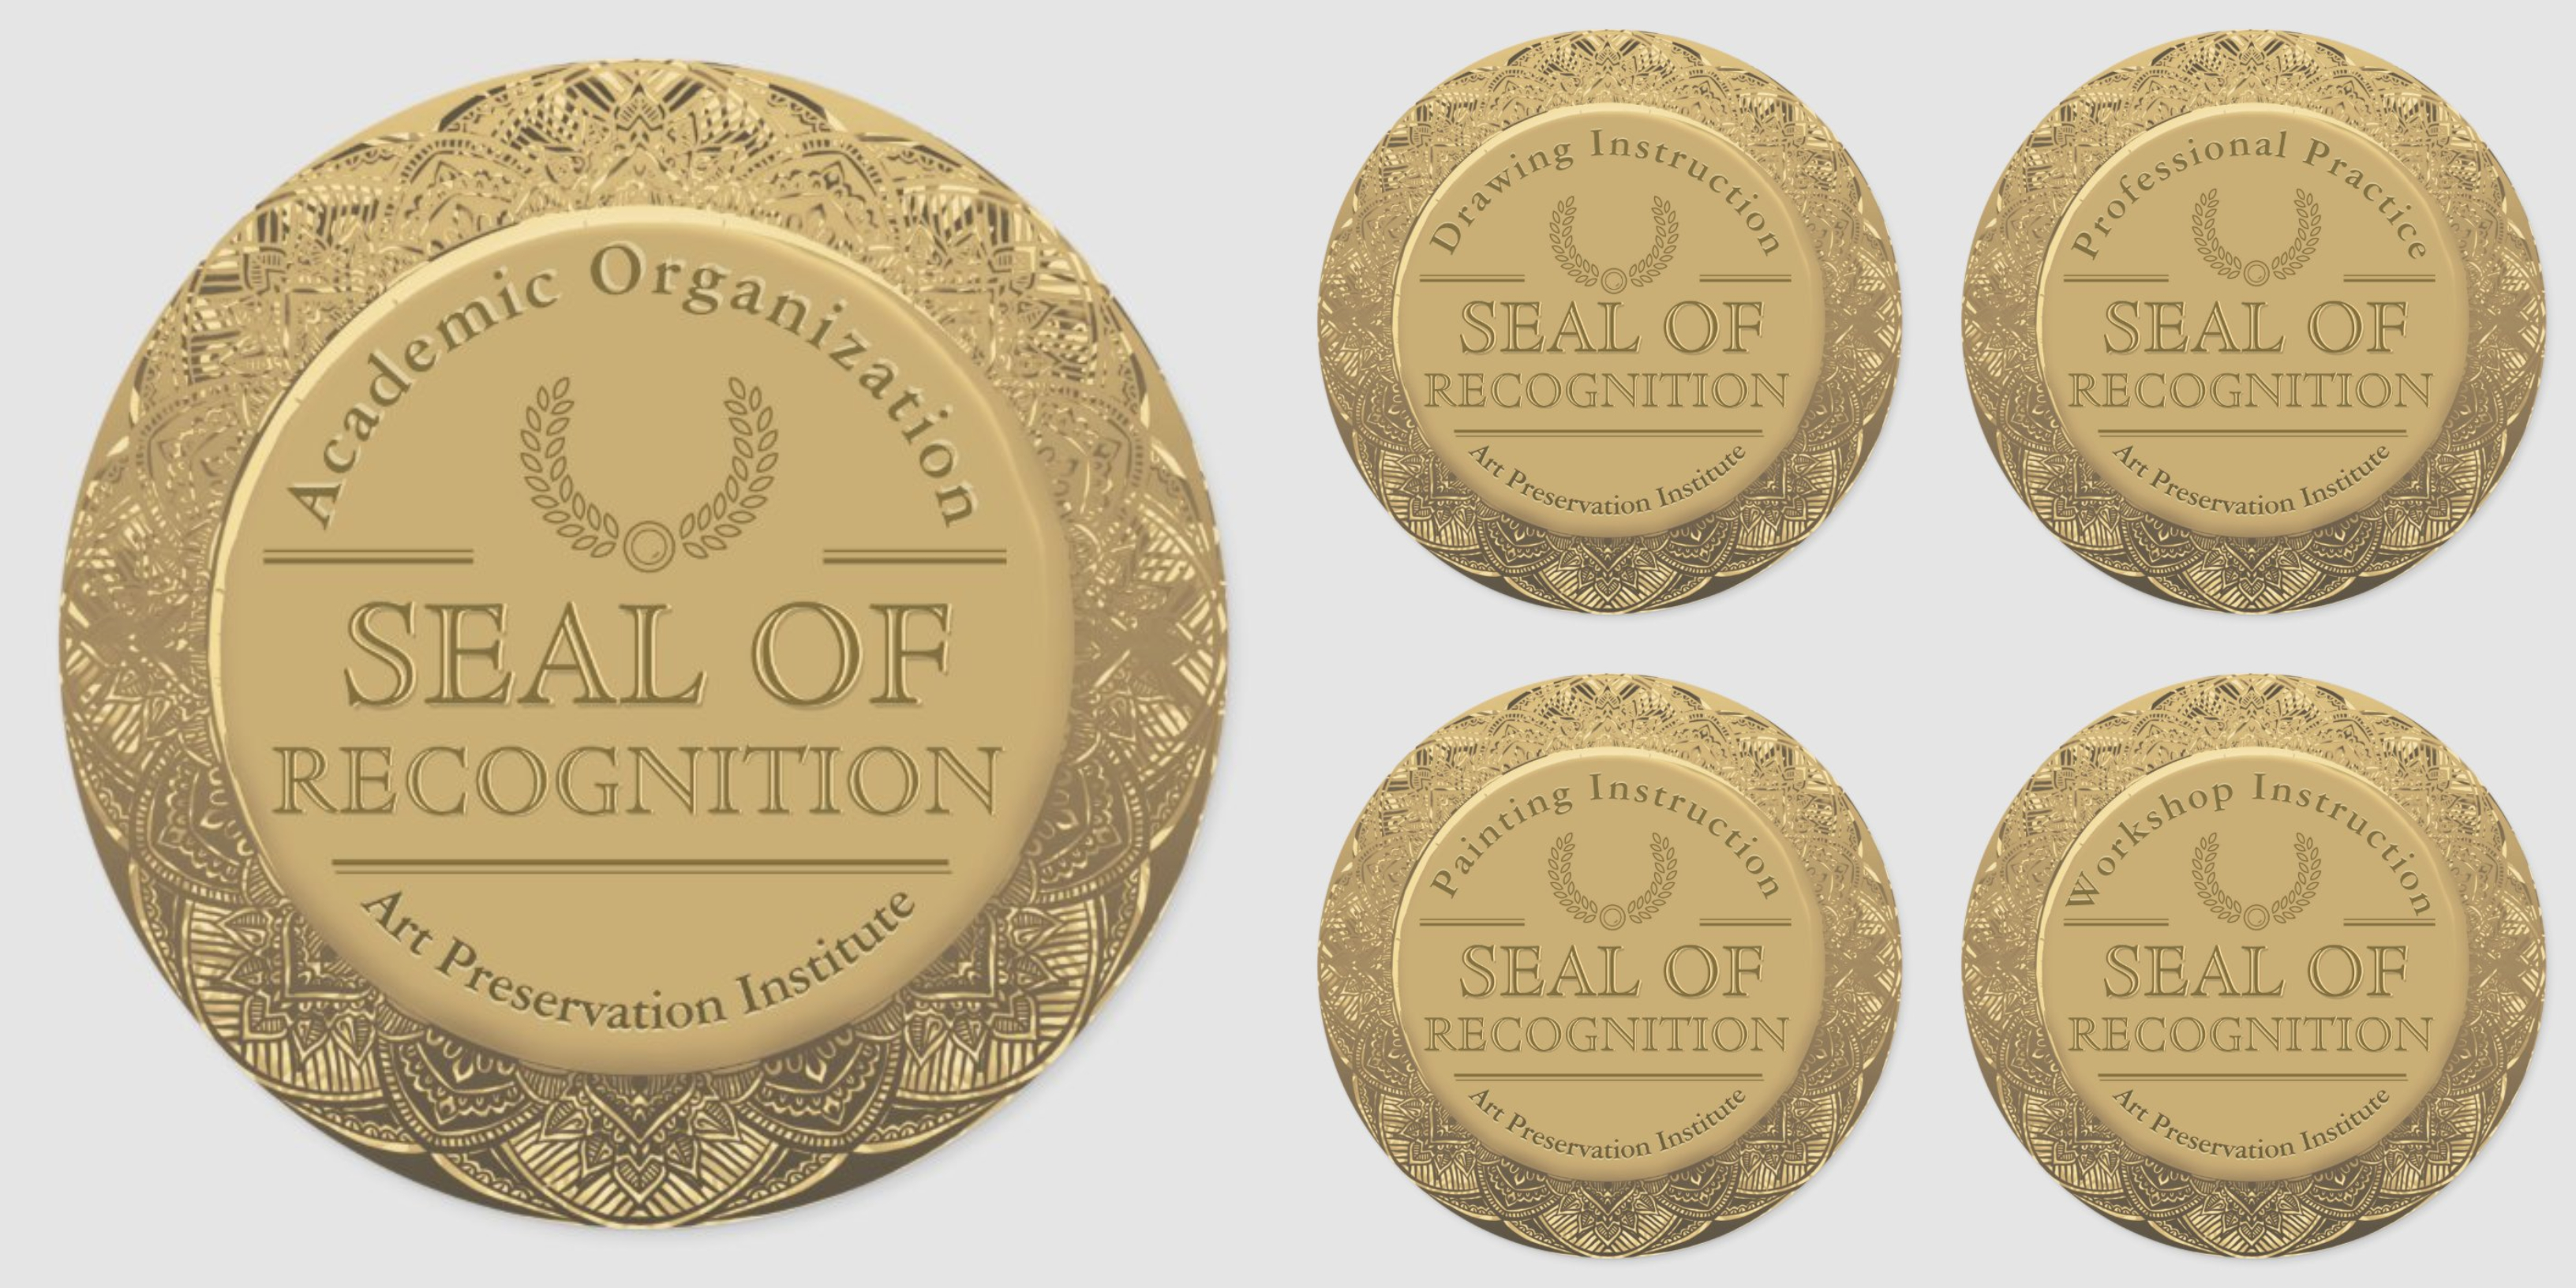 recognitionsealbadge